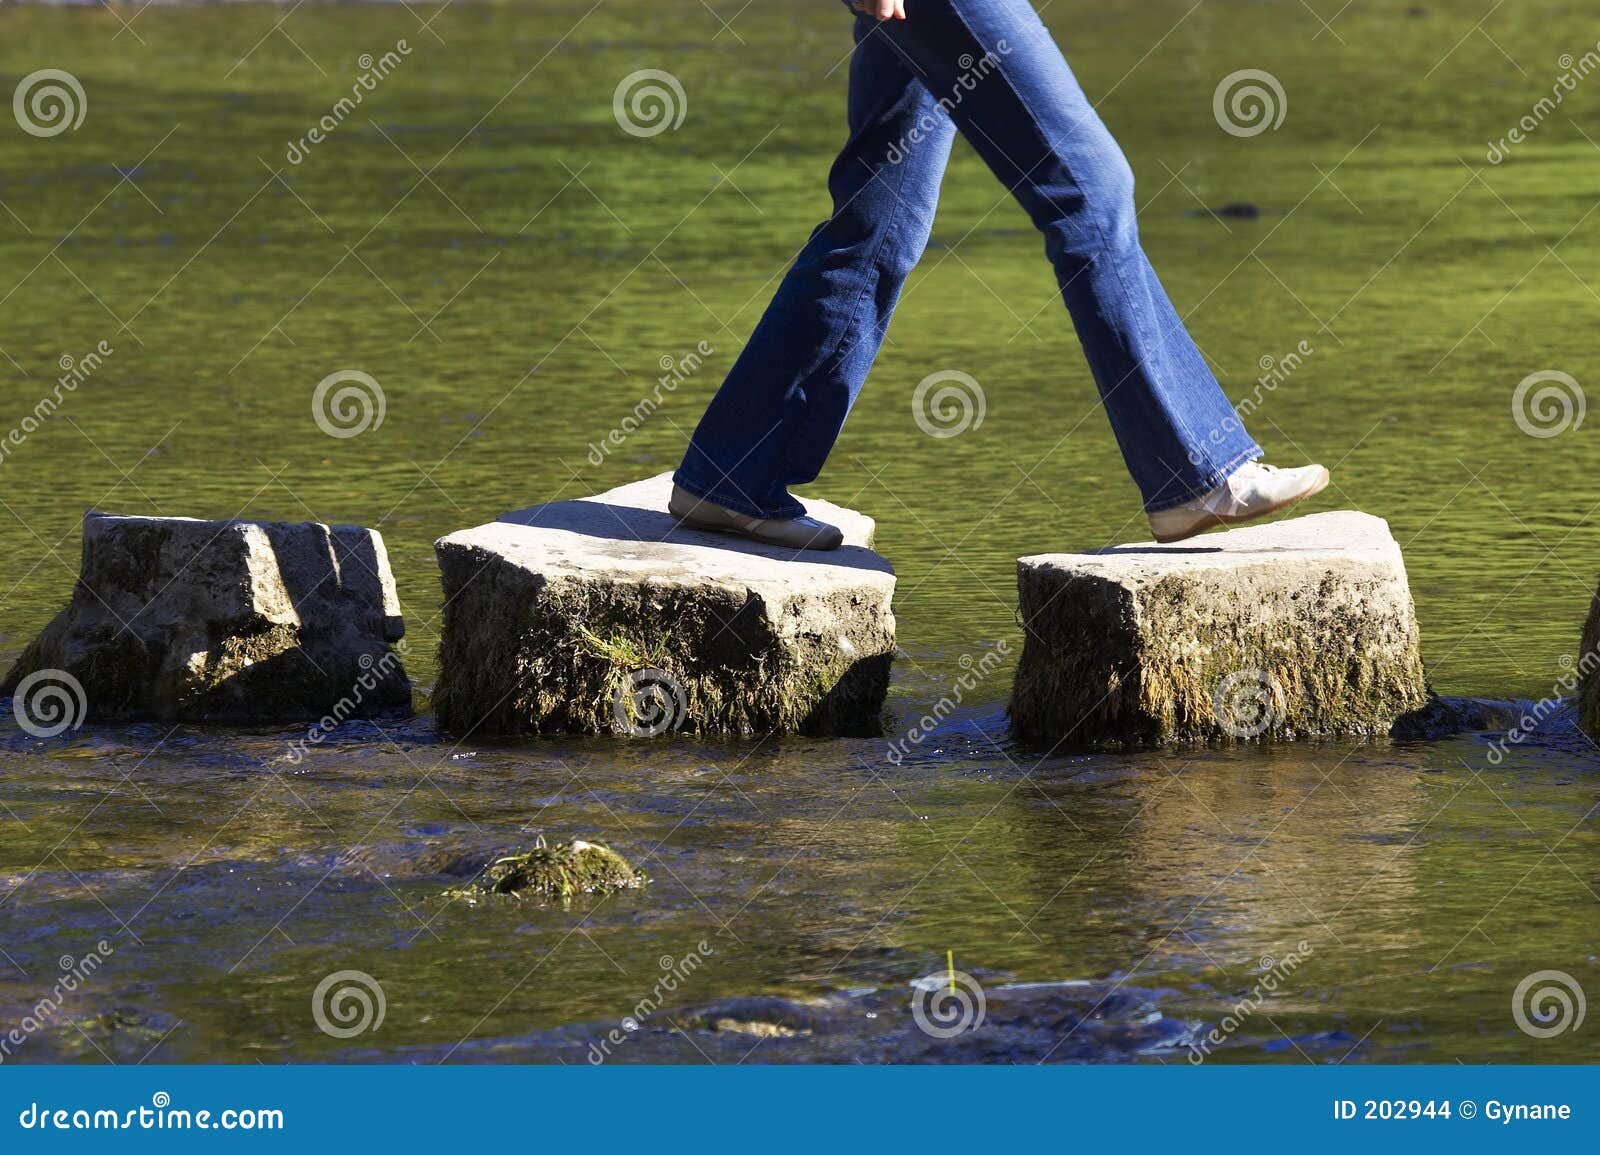 crossing three stepping stones in a river